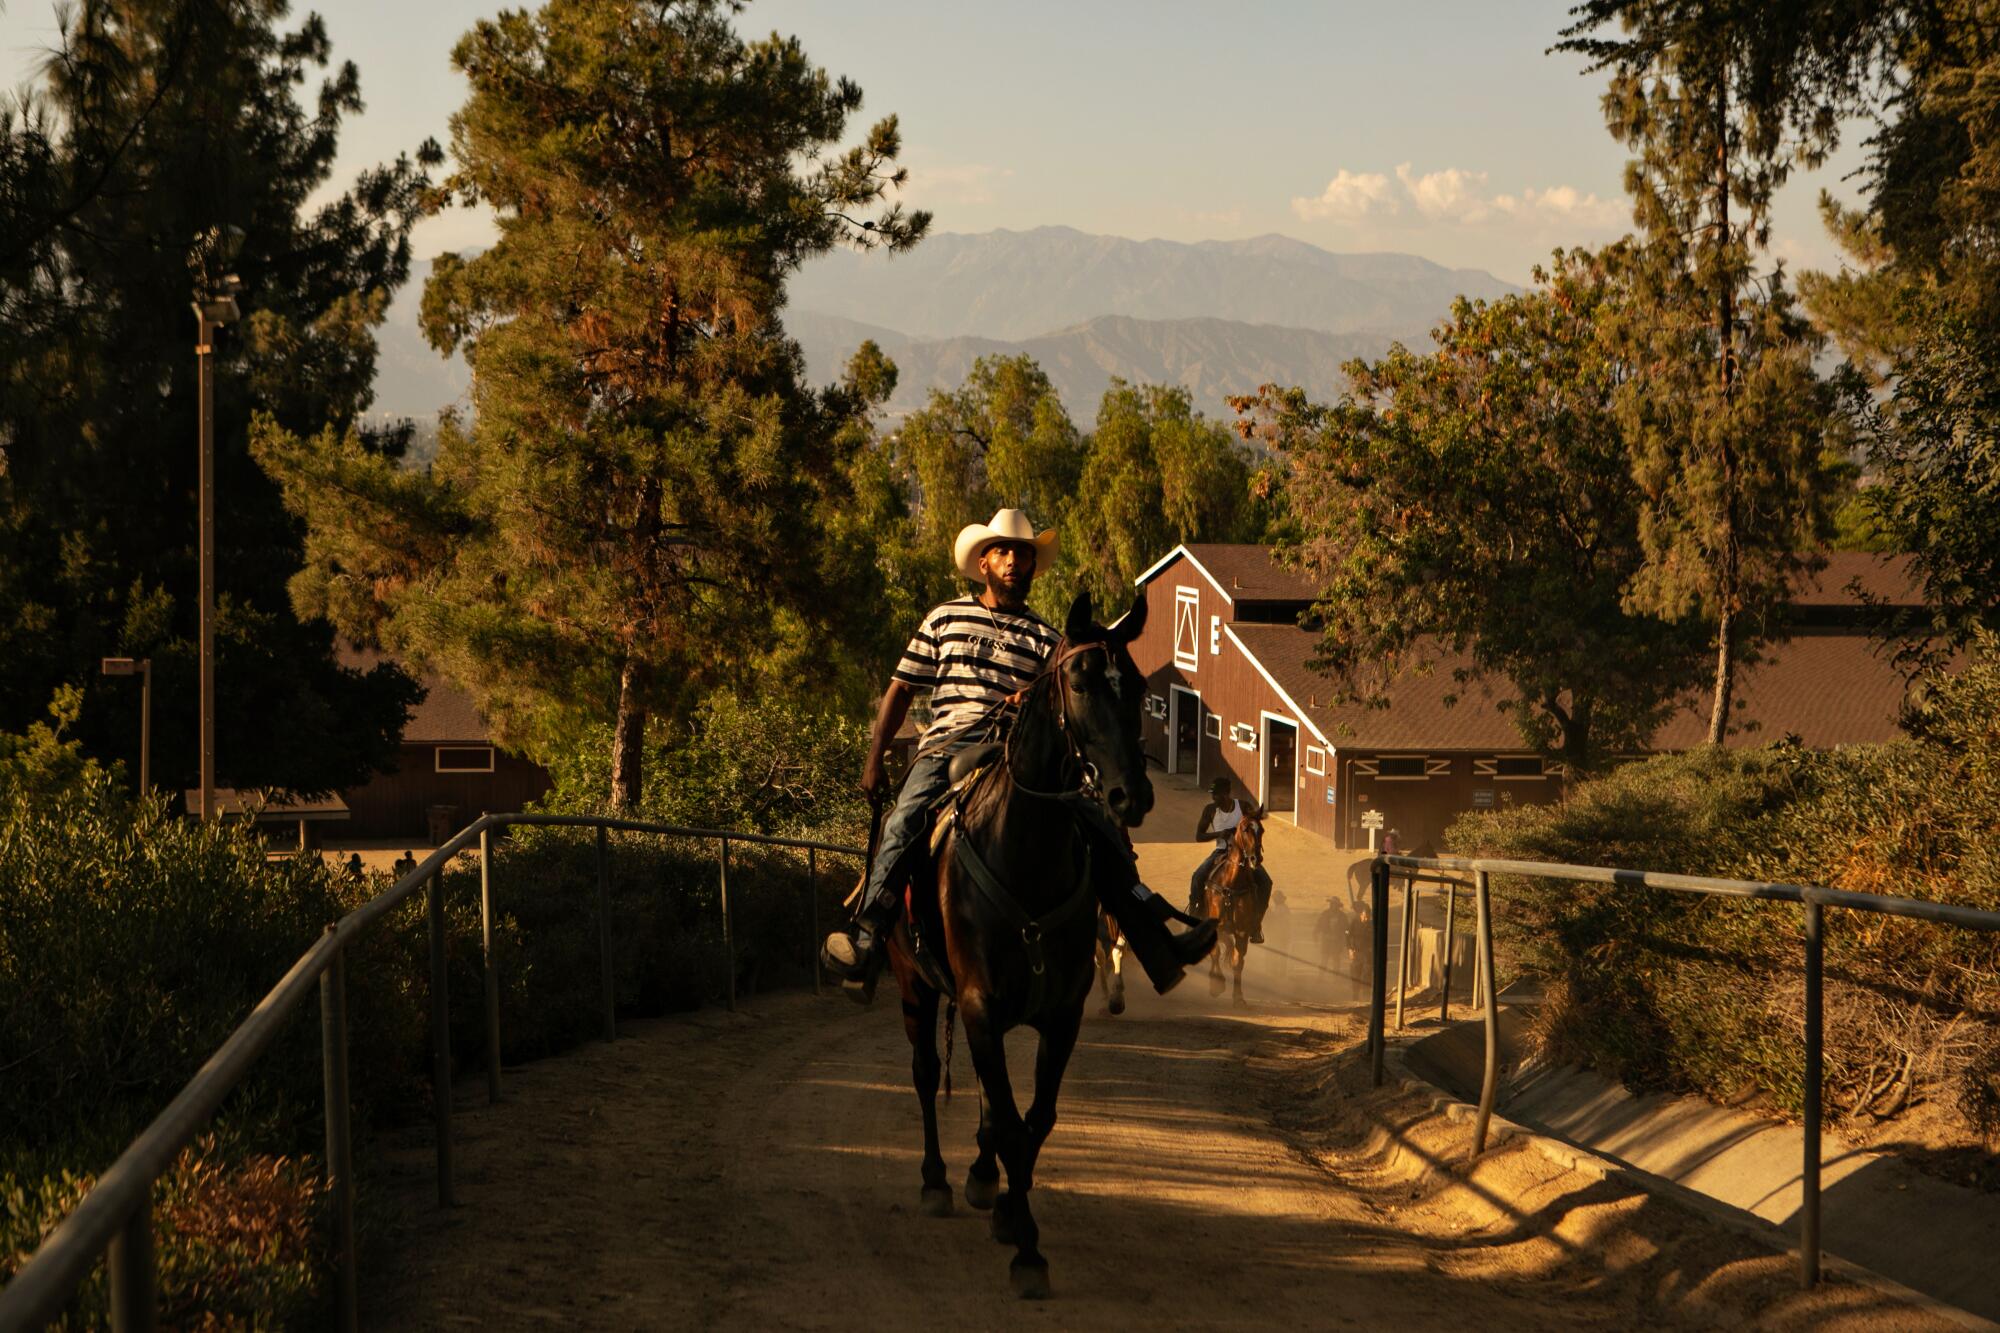 Black men riding horses on a dirt road, with a stable, evergreens and mountains in the background